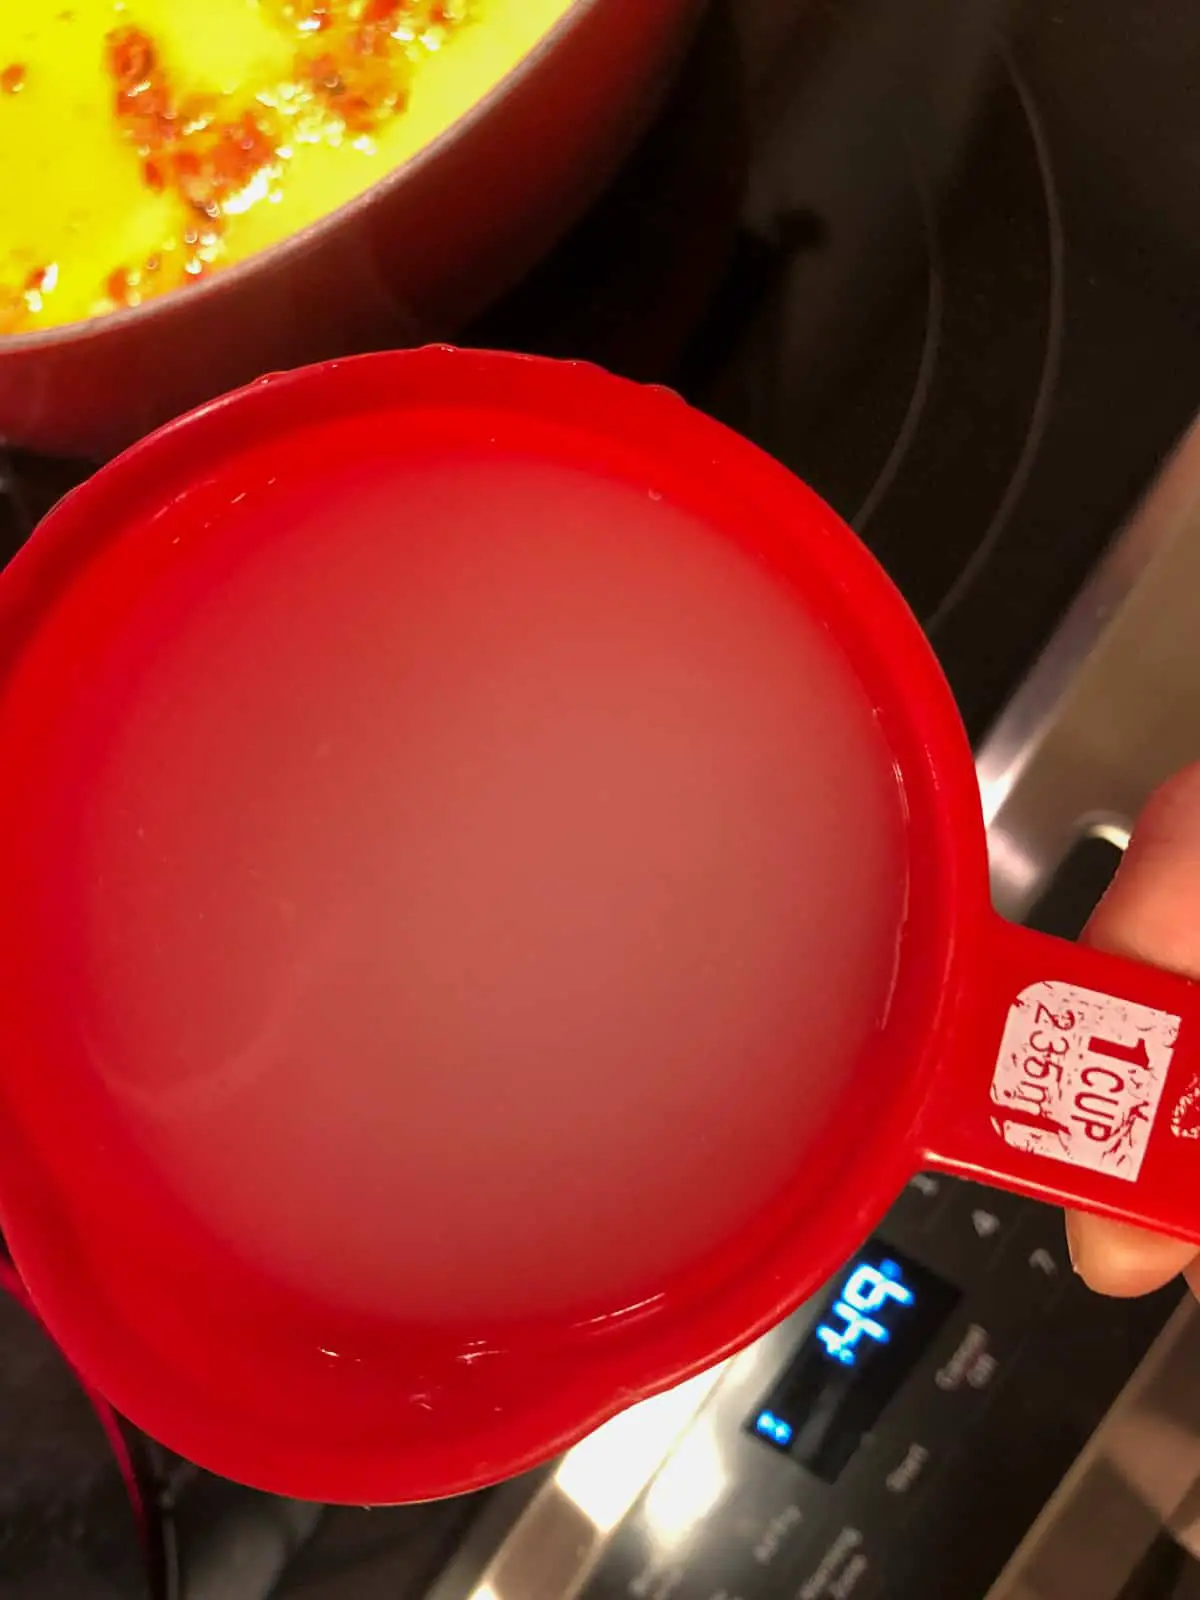 A red measuring cup containing starchy pasta water and a silver stove in the background.